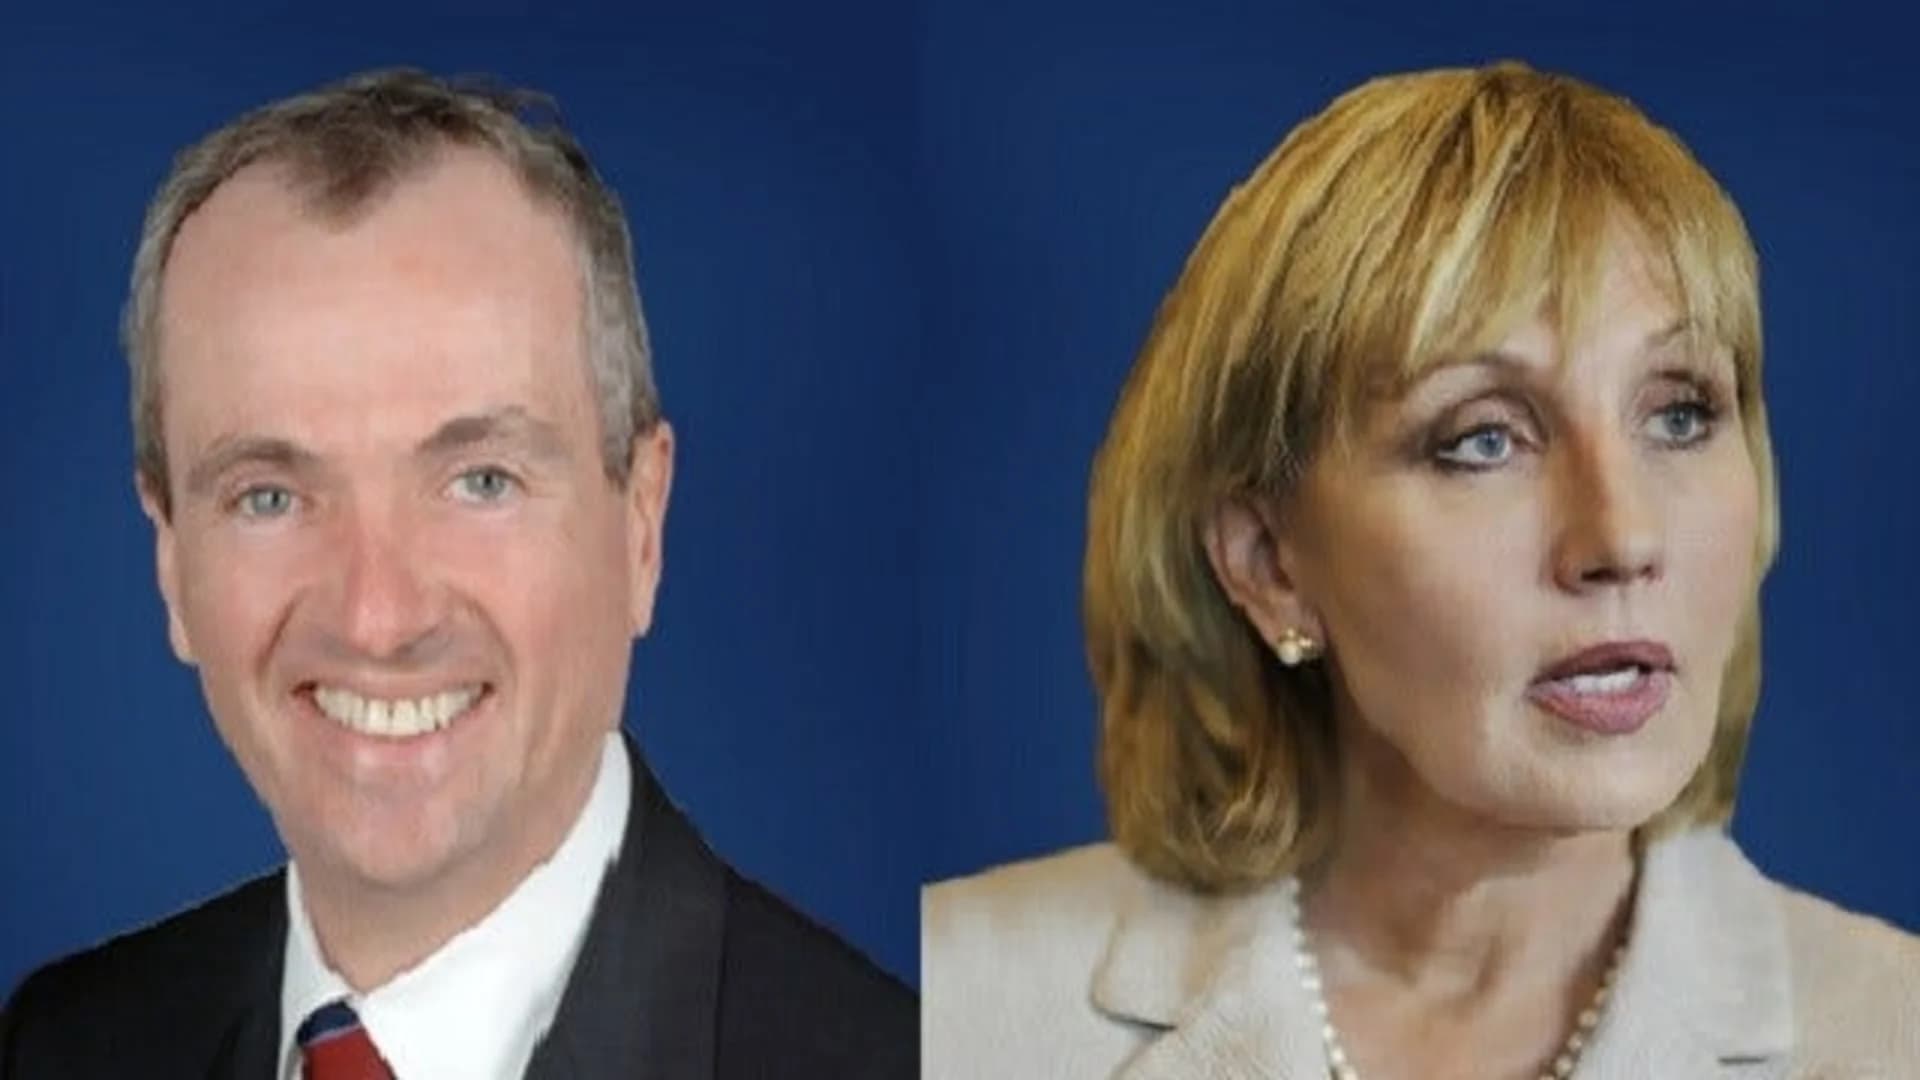 Murphy promises STEM growth, Guadagno looks to tax breaks